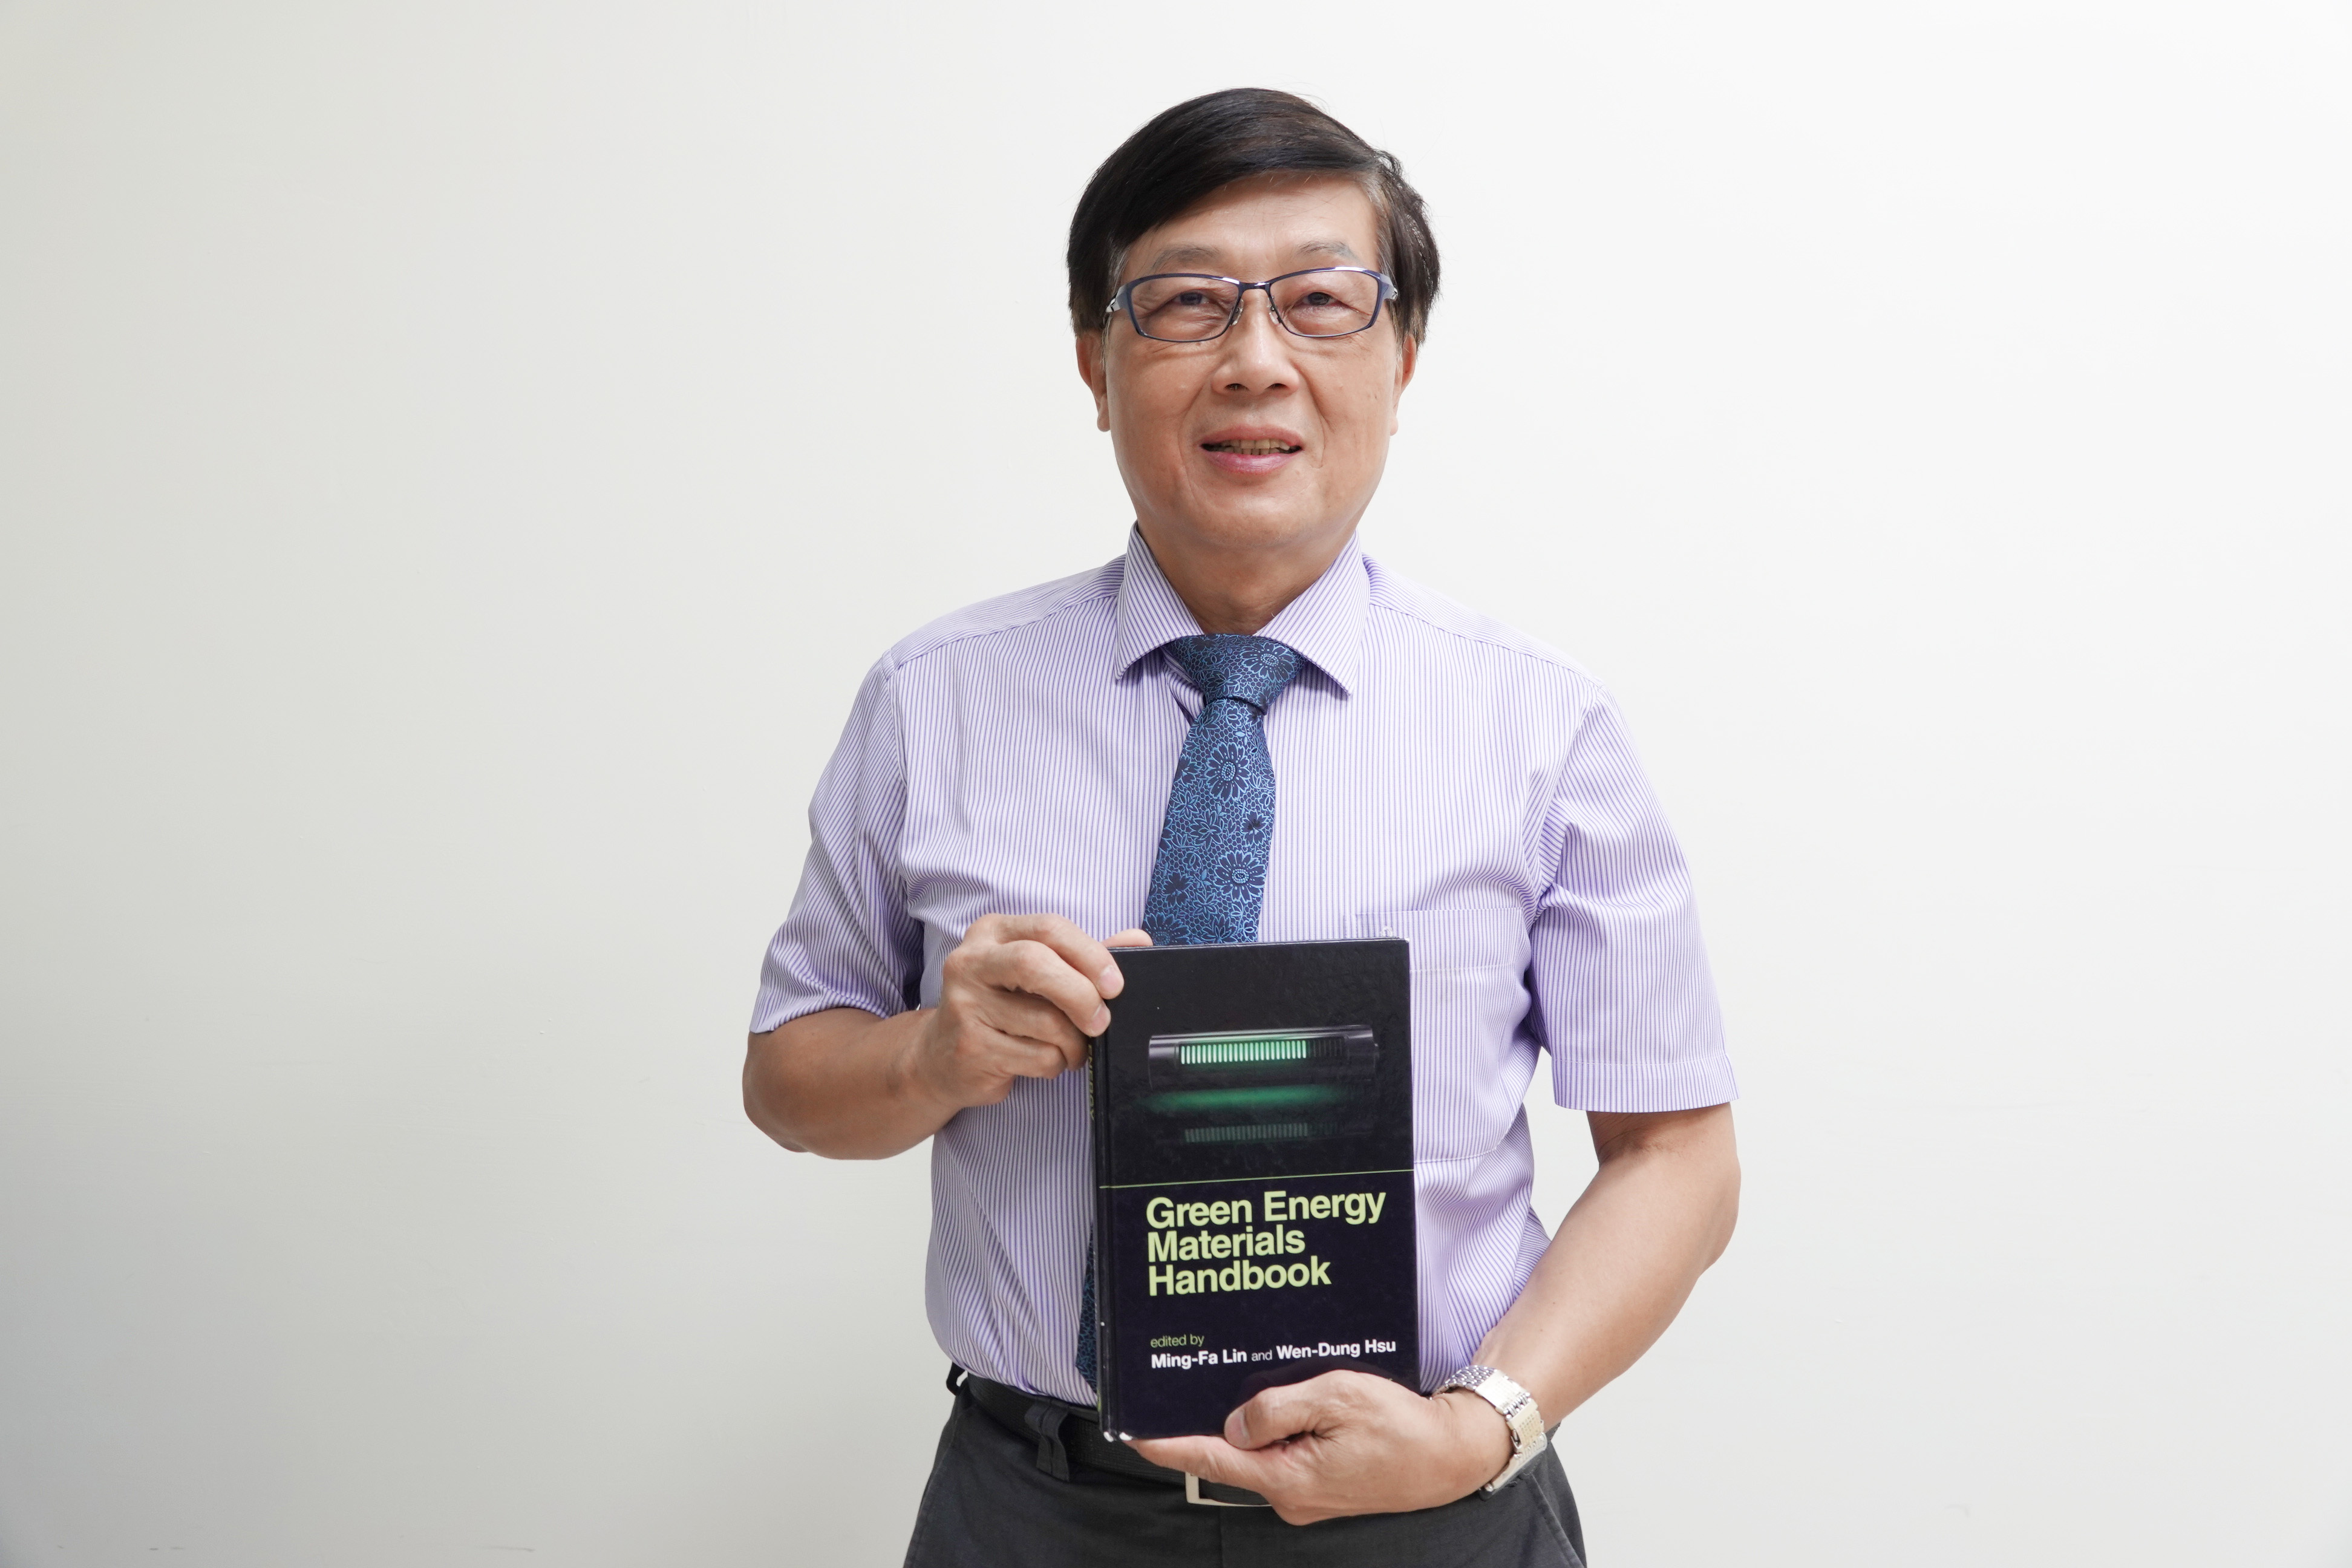 Huang, Jow-Lay, the Hi-GEM director, led the members in publishing three monographs on green energy.